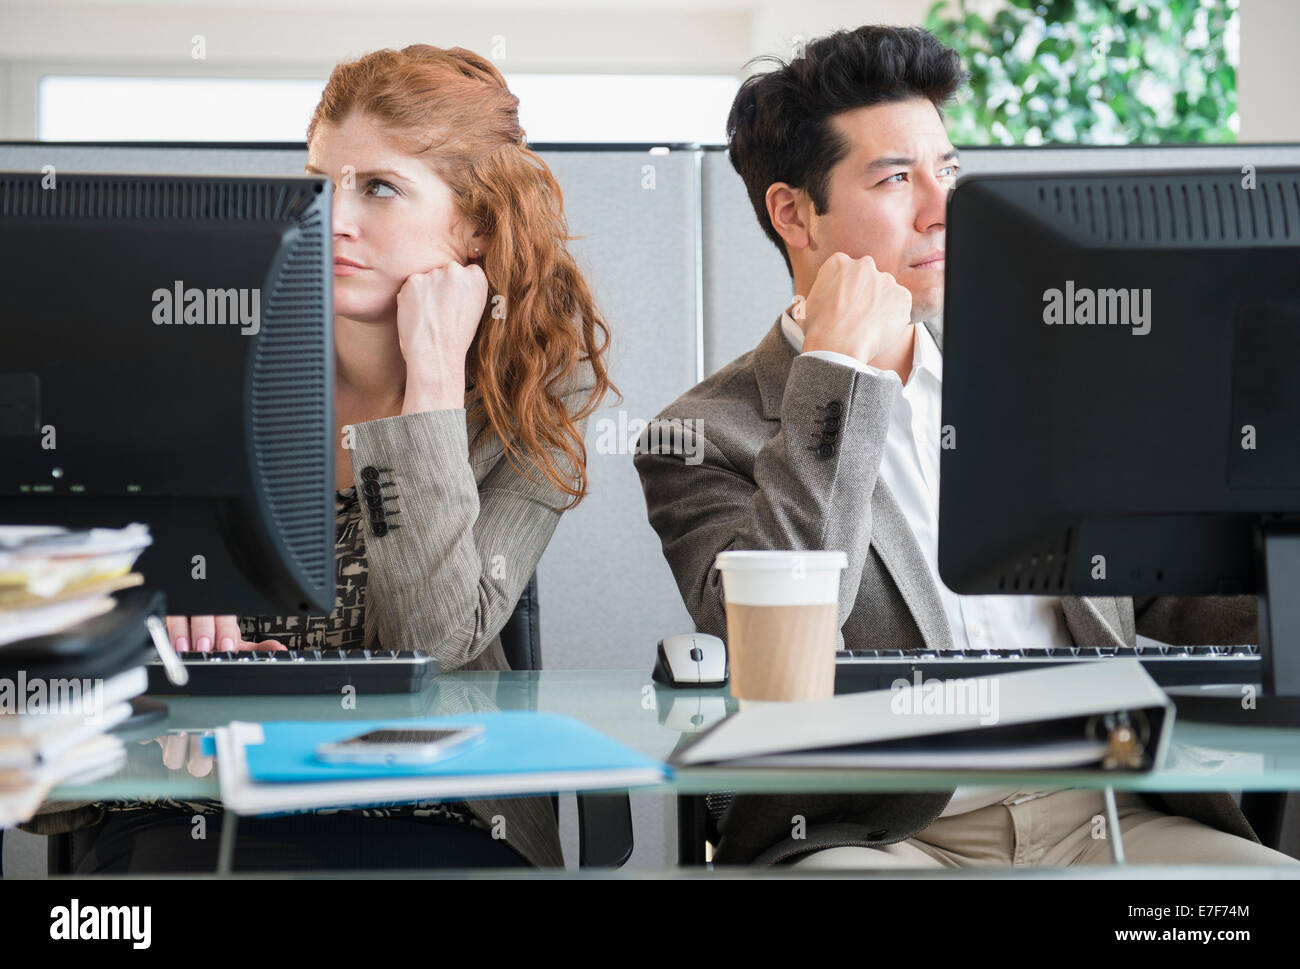 Business people bored at desks Stock Photo